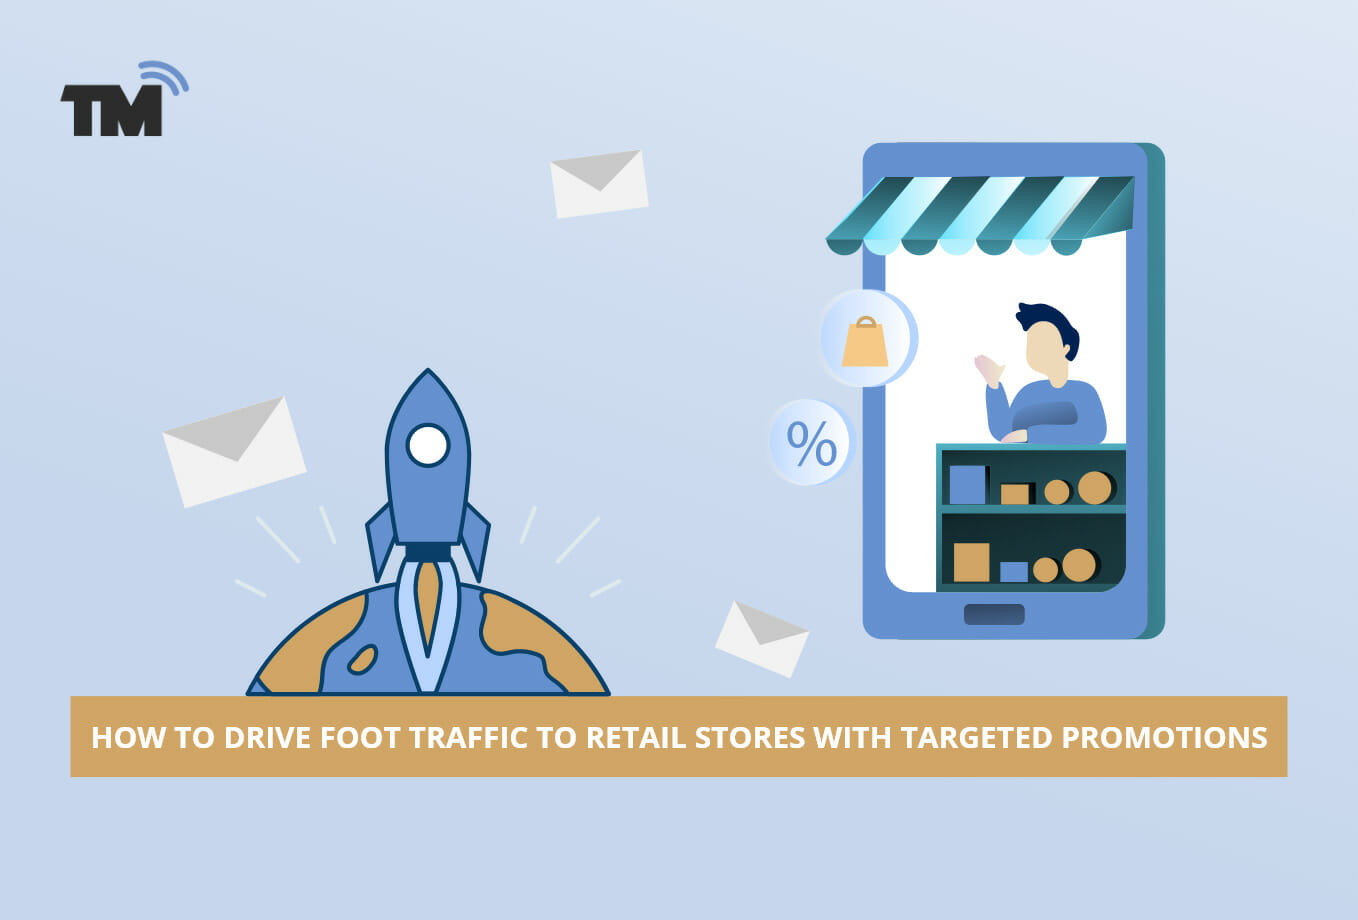 SMS Marketing: How to Drive Foot Traffic to Retail Stores With Targeted Promotions